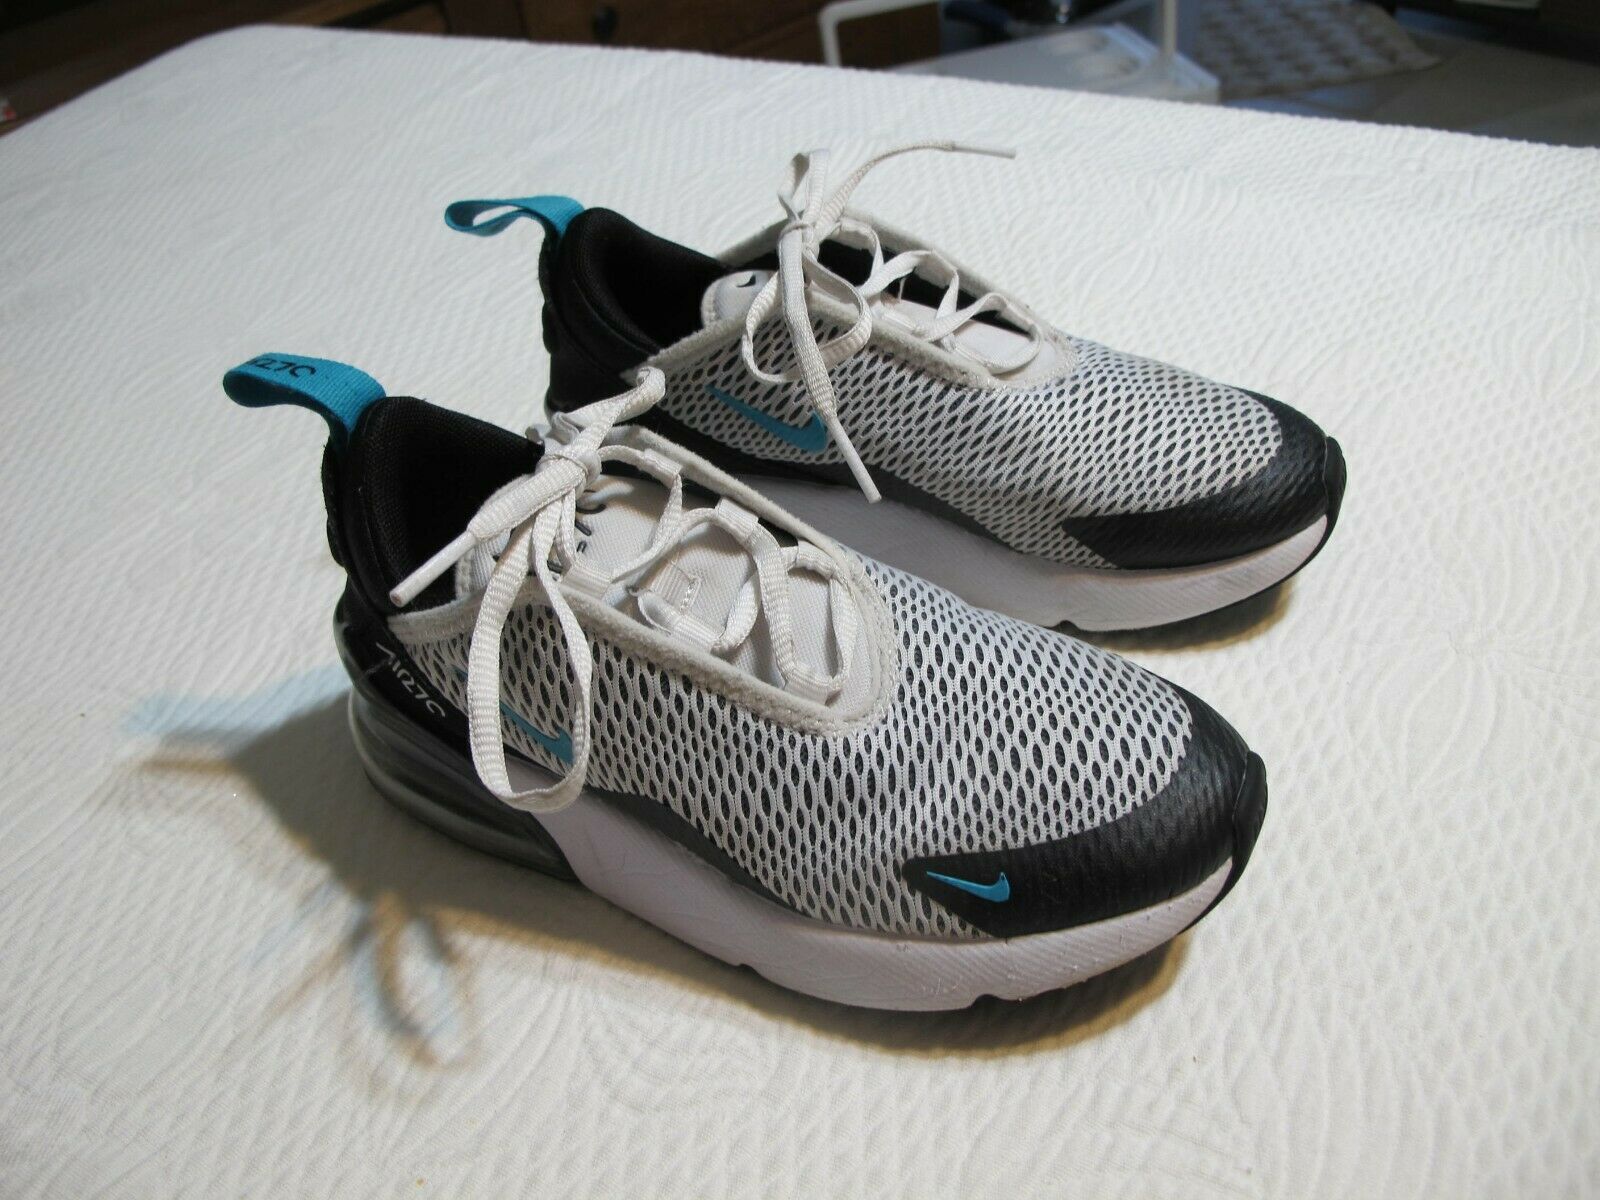 Nike Air 70 Air Max US sz 1Y Netted Black White Turquoise Girls Tie Tennis Shoes